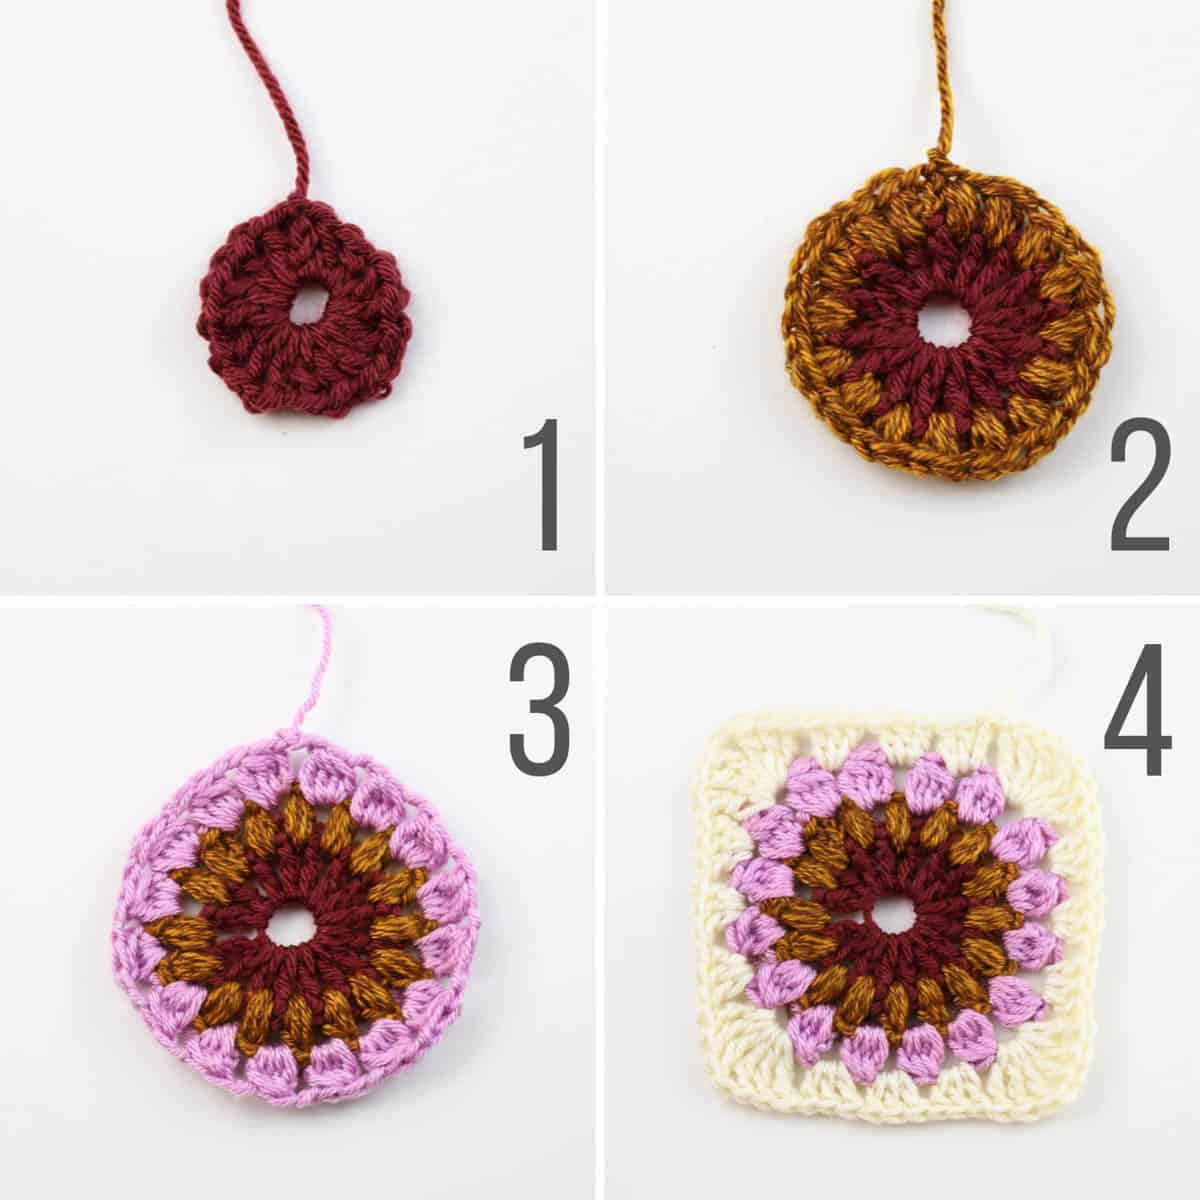 Step by step photo tutorial on how to create a crochet granny square pattern.